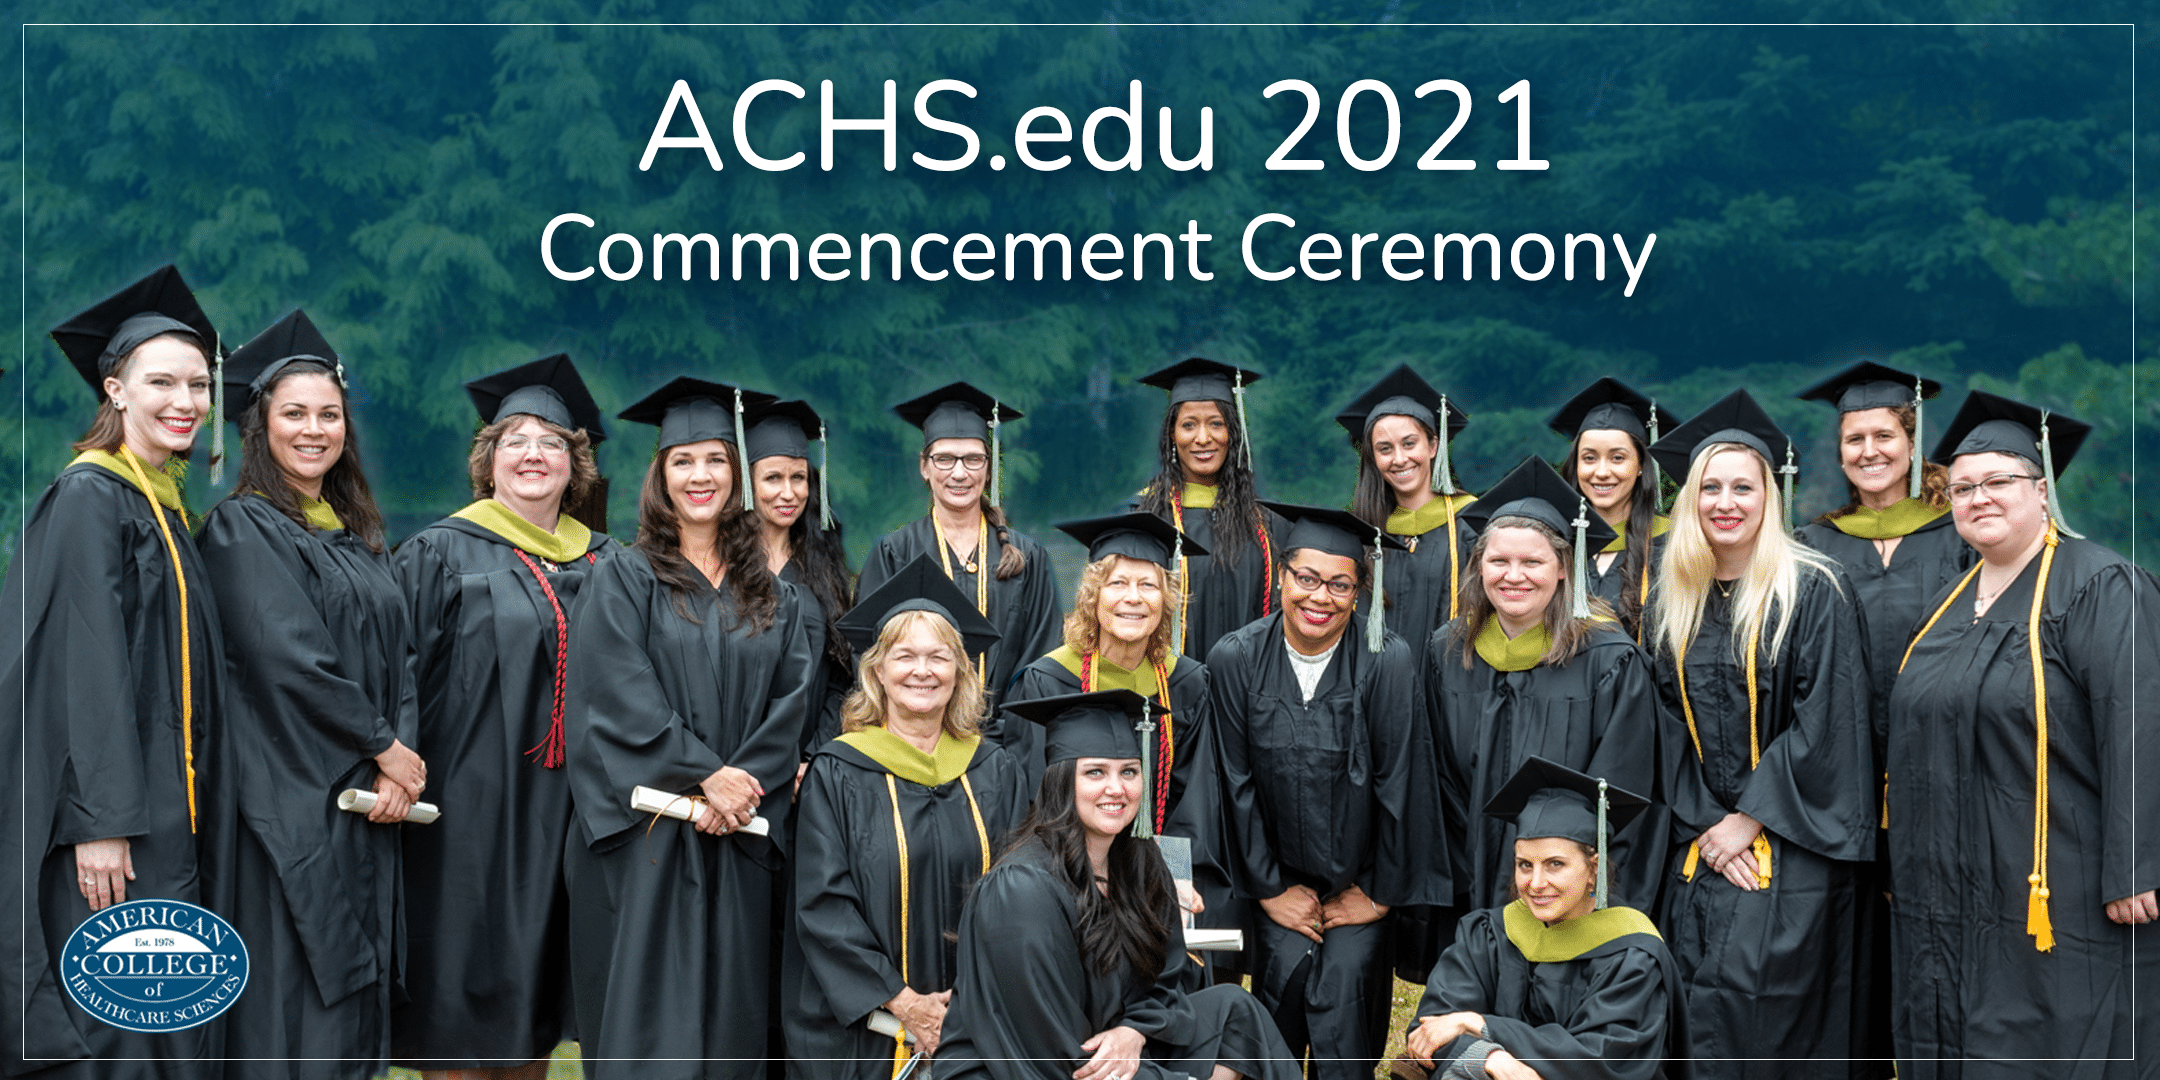 ACHS.edu 2021 Commencement Ceremony American College of Healthcare